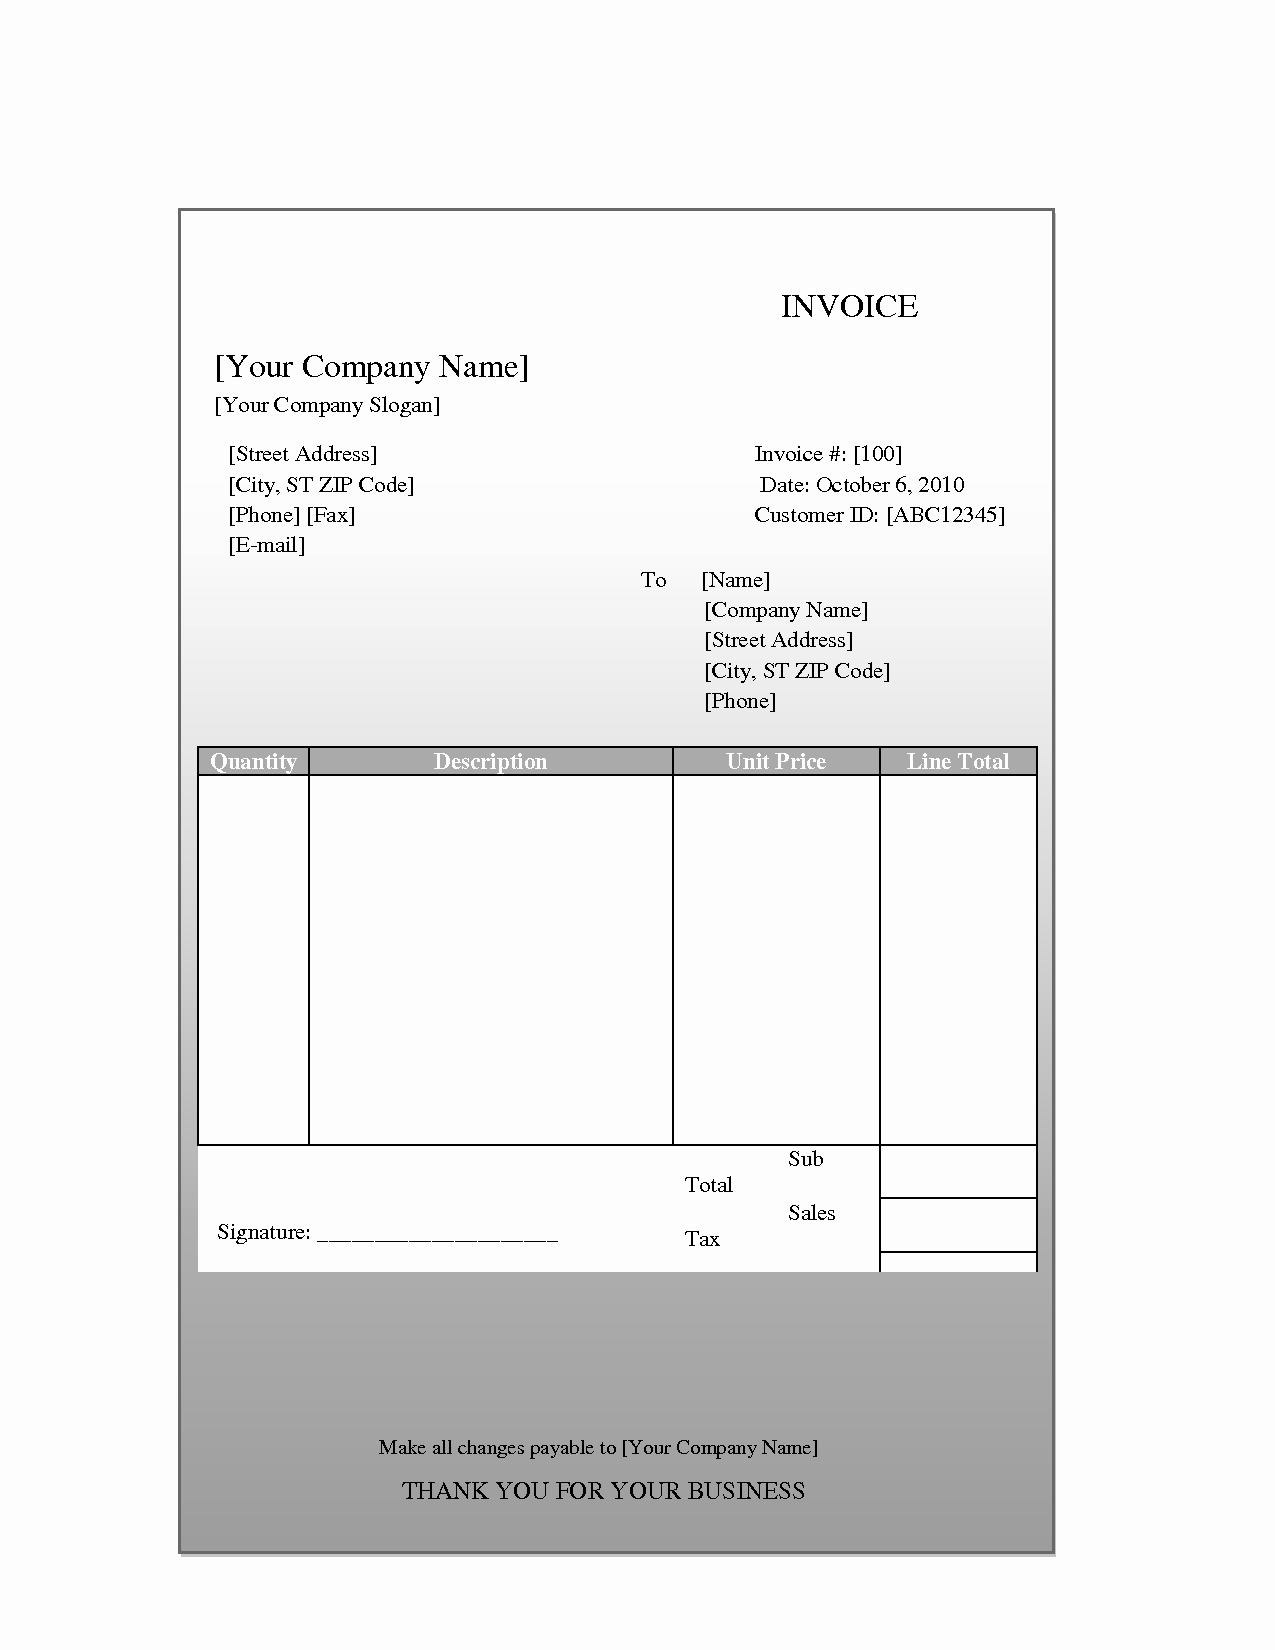 Free Invoice Template for Mac Lovely Invoice forms Mac — Excelxo